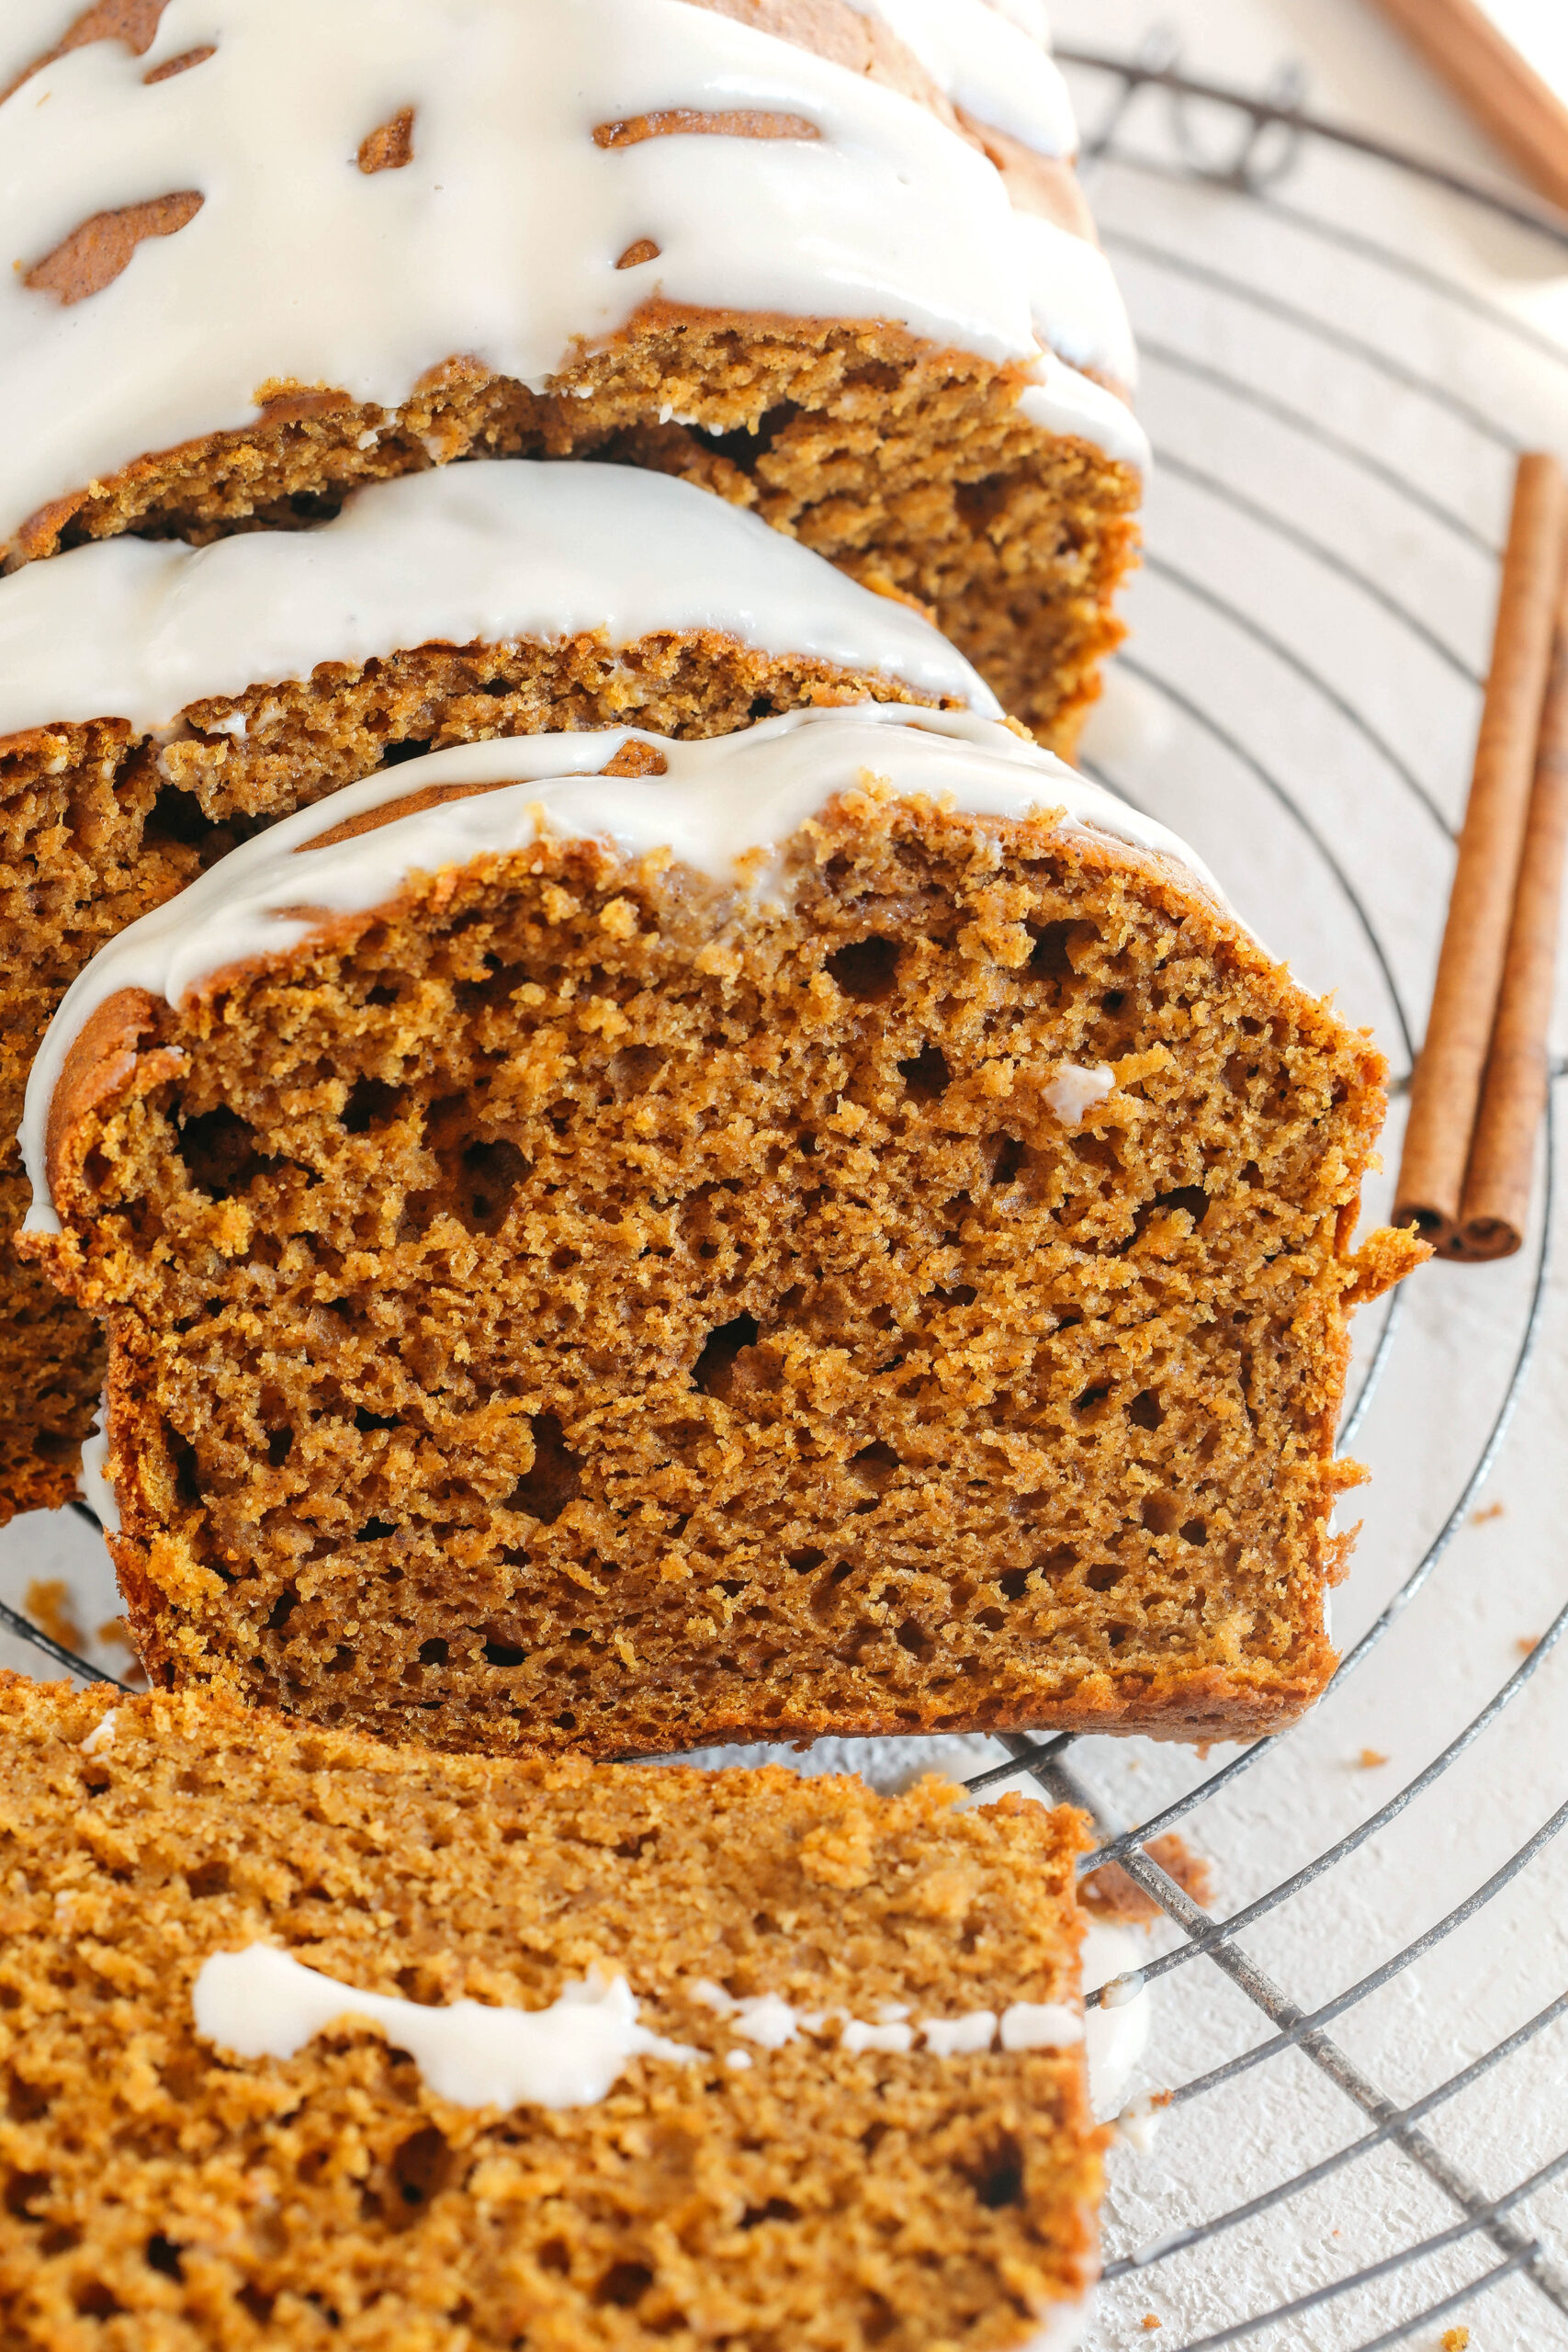 The BEST Healthy Pumpkin Bread recipe that is moist, loaded with pumpkin flavor and made without any butter or refined sugar!  Topped with a delicious maple cream cheese glaze for the perfect fall treat this season!